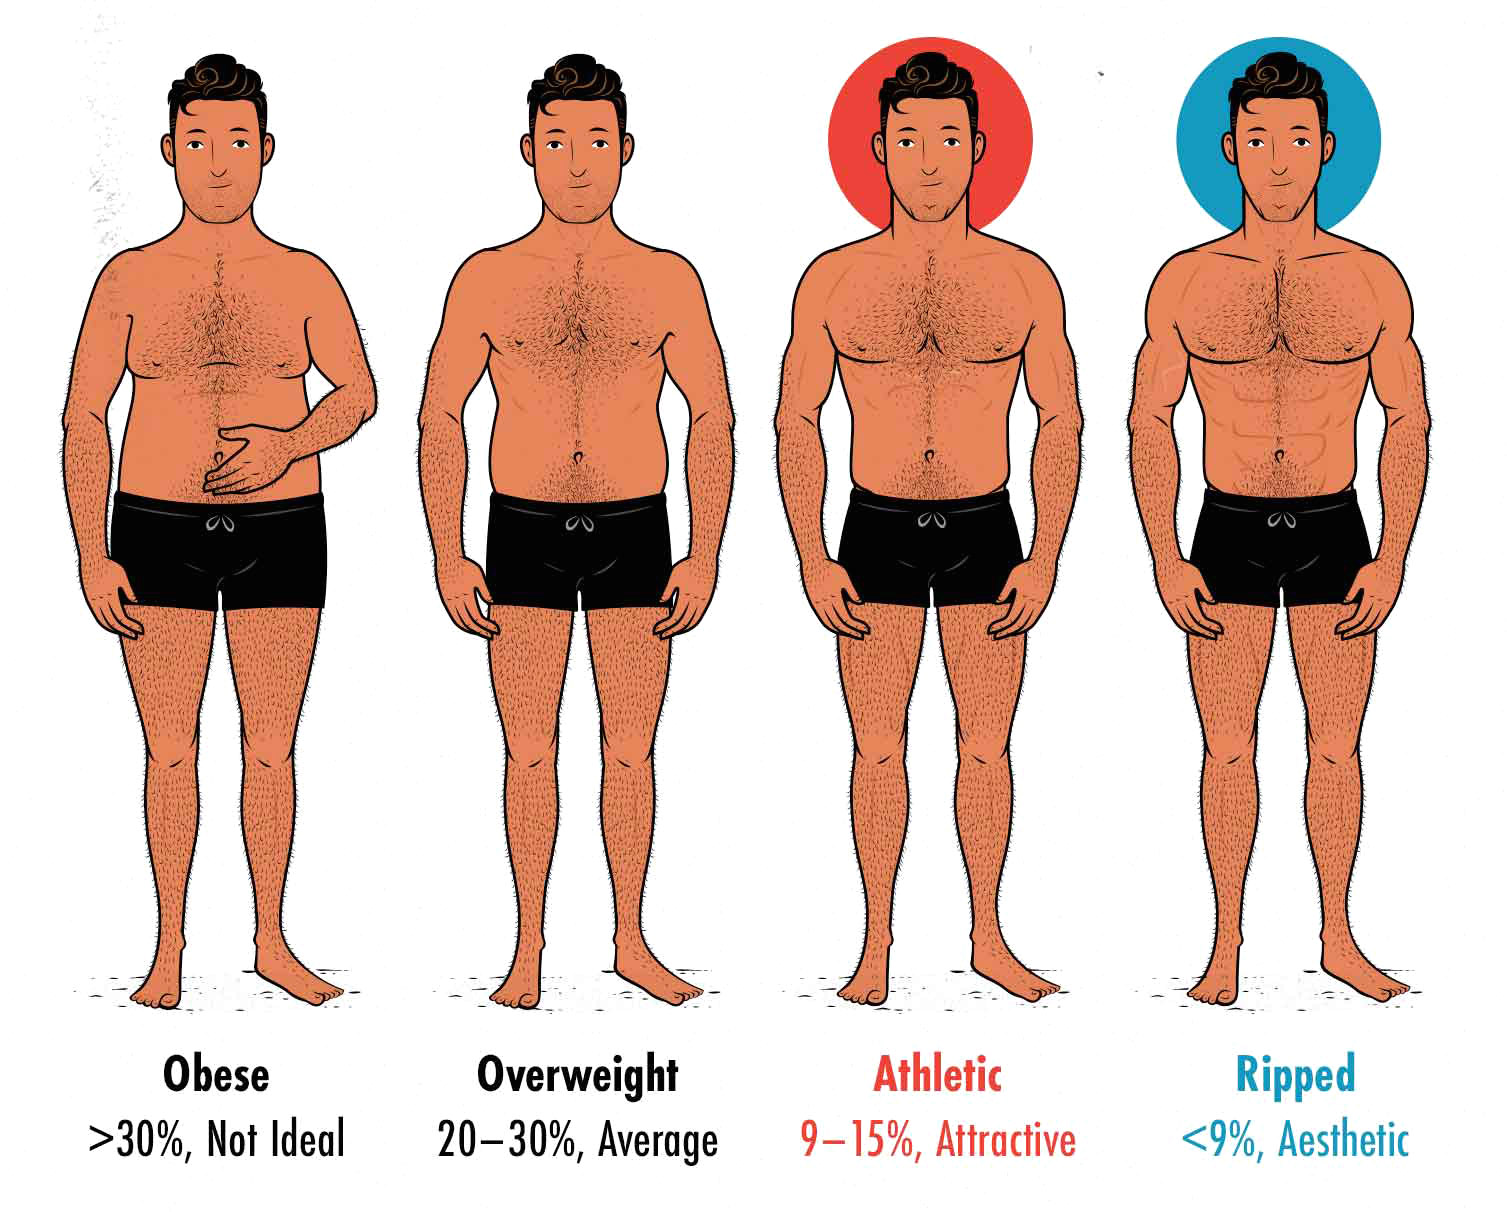 Diagram showing the most attractive and aesthetic male body-fat percentages.